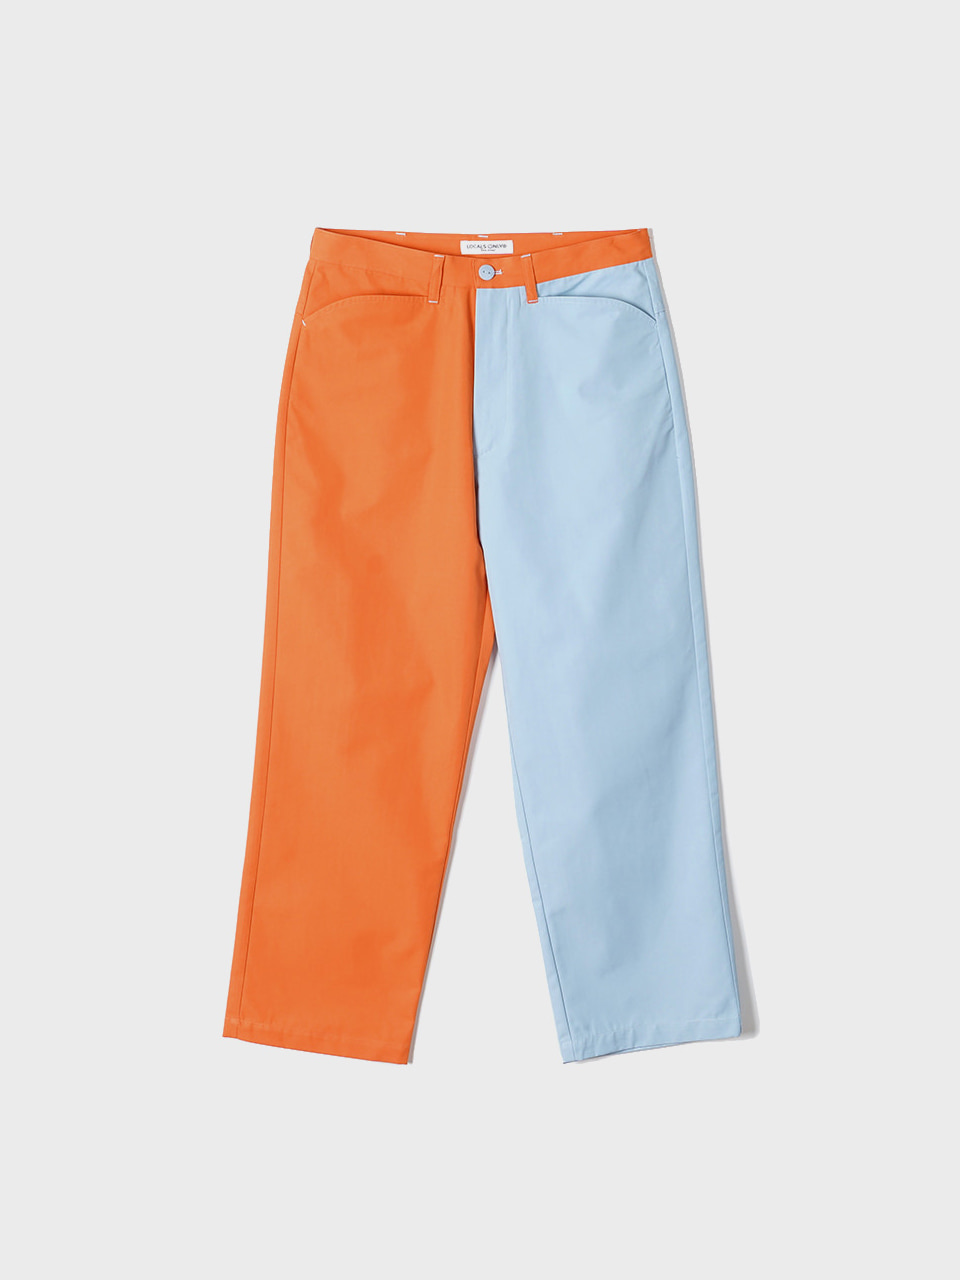 LOCALS ONLY Two Face Skater pants &quot;Orange/Skyblue&quot;